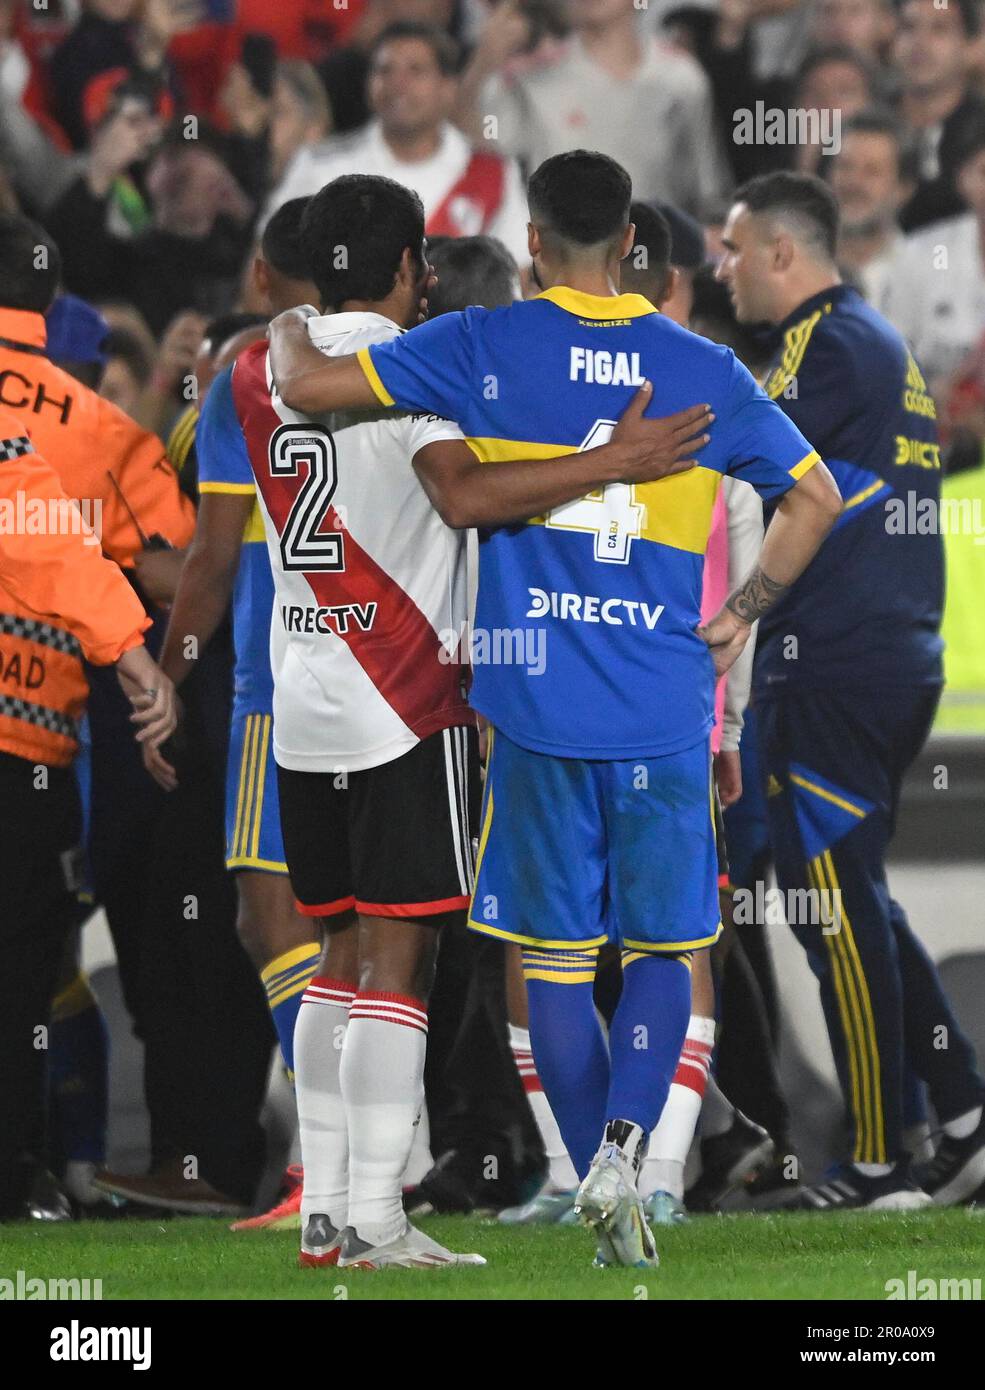 Buenos Aires, Argentina. 07th May, 2023. Argentina, Buenos Aires - 07 May 2023: Robert Rojas of River Plate and Jorge Figal of Boca Juniors hug after 7 players received red cards during fight between both team of River Plate and Boca Juniors during the Torneo Binance 2023 of Argentina Liga Profesional match between River Plate and Boca Juniors at Estadio Monumental, Buenos Aires, Argentina. Photo by SFSI/Diego Halisz Credit: Sebo47/Alamy Live News Stock Photo